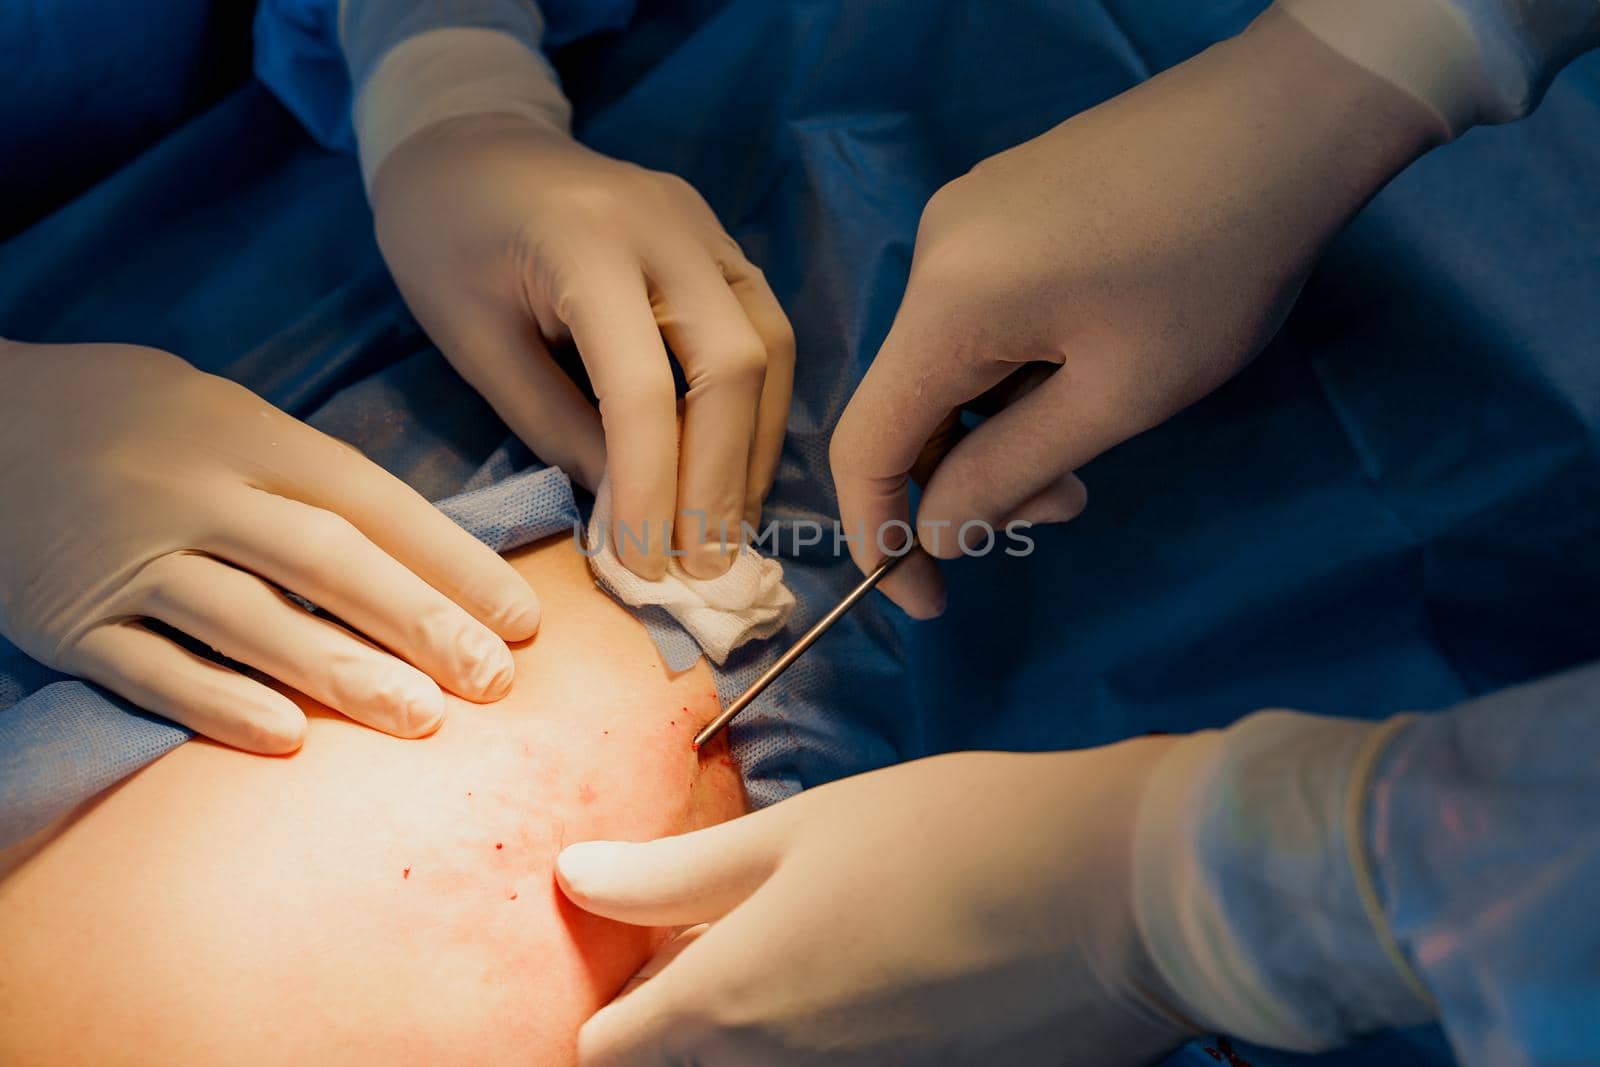 Liposuction for lipofilling surgery operation. close-up photo of 2 surgeon do plastic surgery named blepharoplasty in medical clinic by Rabizo